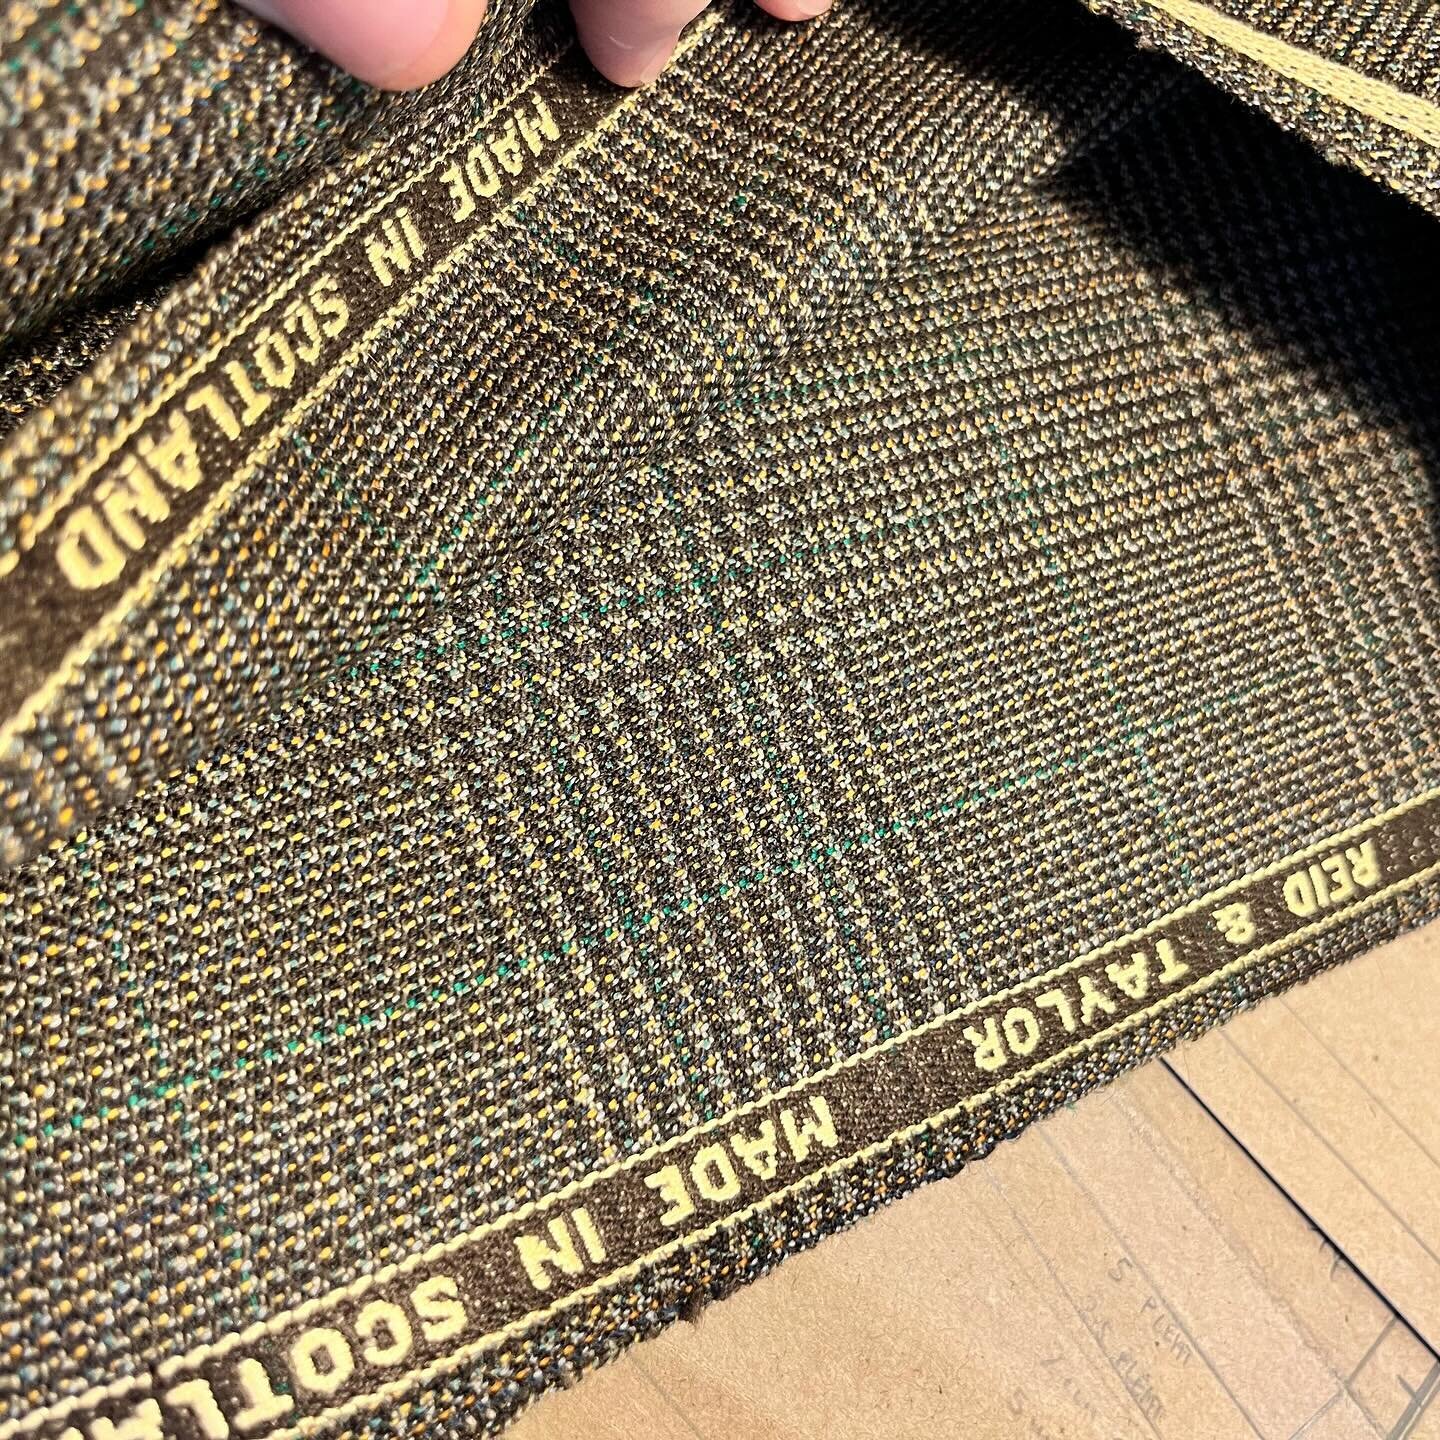 Vintage Reid and Taylor cloth. Beautiful check. Waiting for a future customer as I&rsquo;m a bit too tall and wide for this length. Books insta

#bespoke
#handmade
#bookstc
#bookstradingco
#craft
#books
#tailor
#London
#readmorebooks
#sartoria
#reida